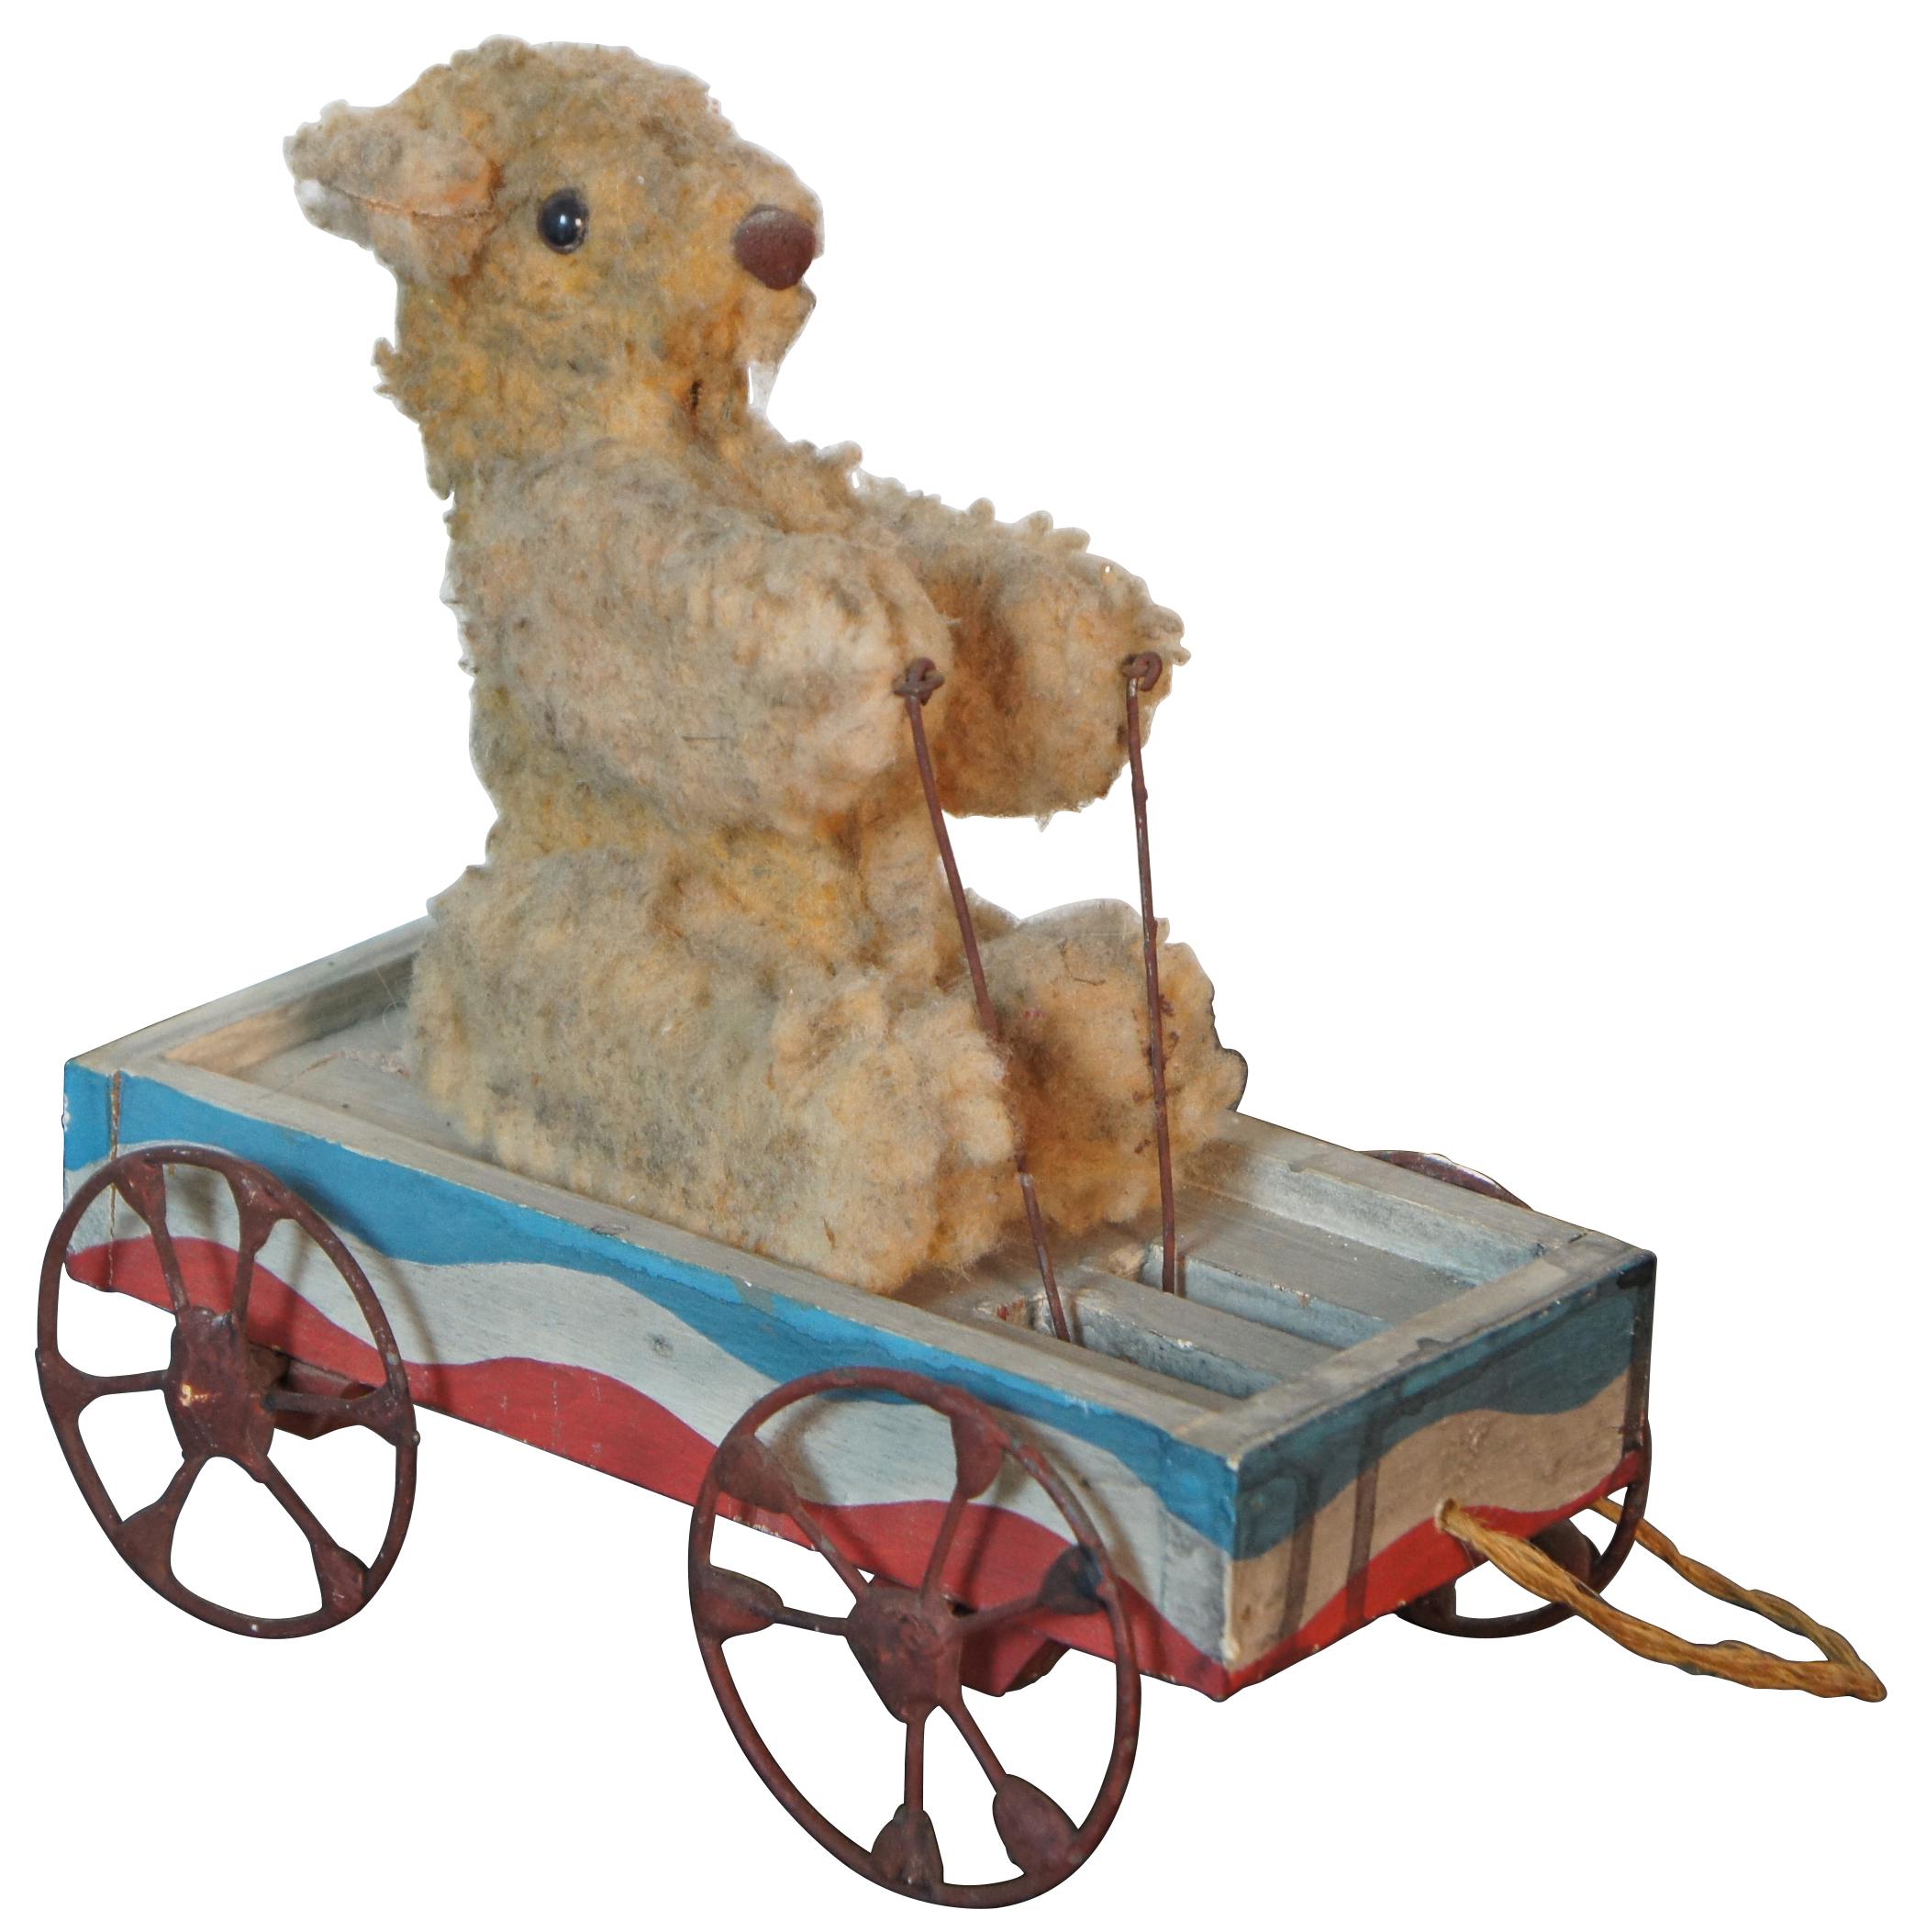 Antique wheeled platform articulating pull toy featuring a teddy bear stuffed animal seated in a red white and blue wagon with arms that move up and down as it rolls.
 